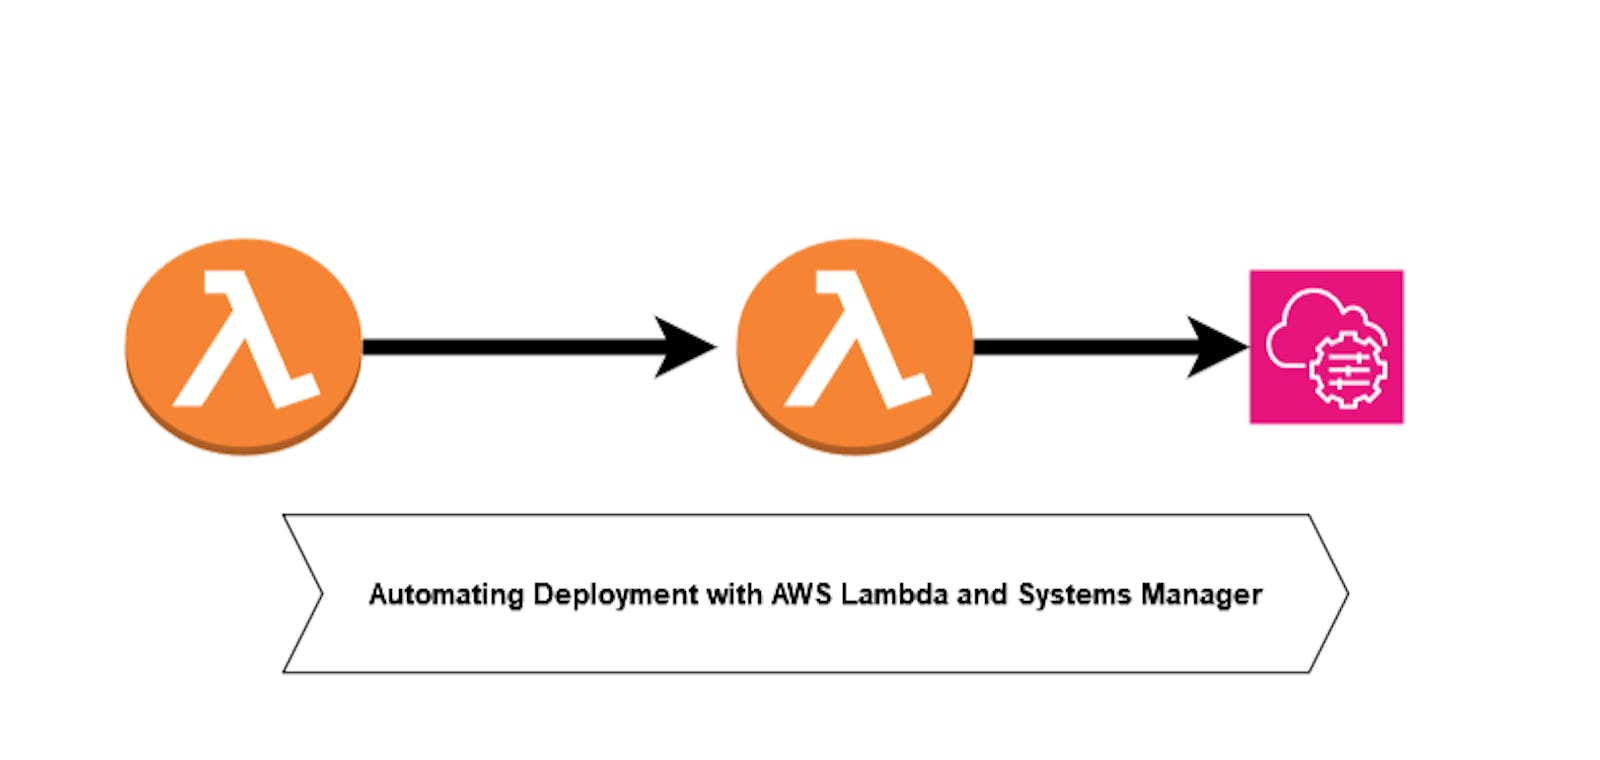 Automating Deployment with AWS Lambda and Systems Manager